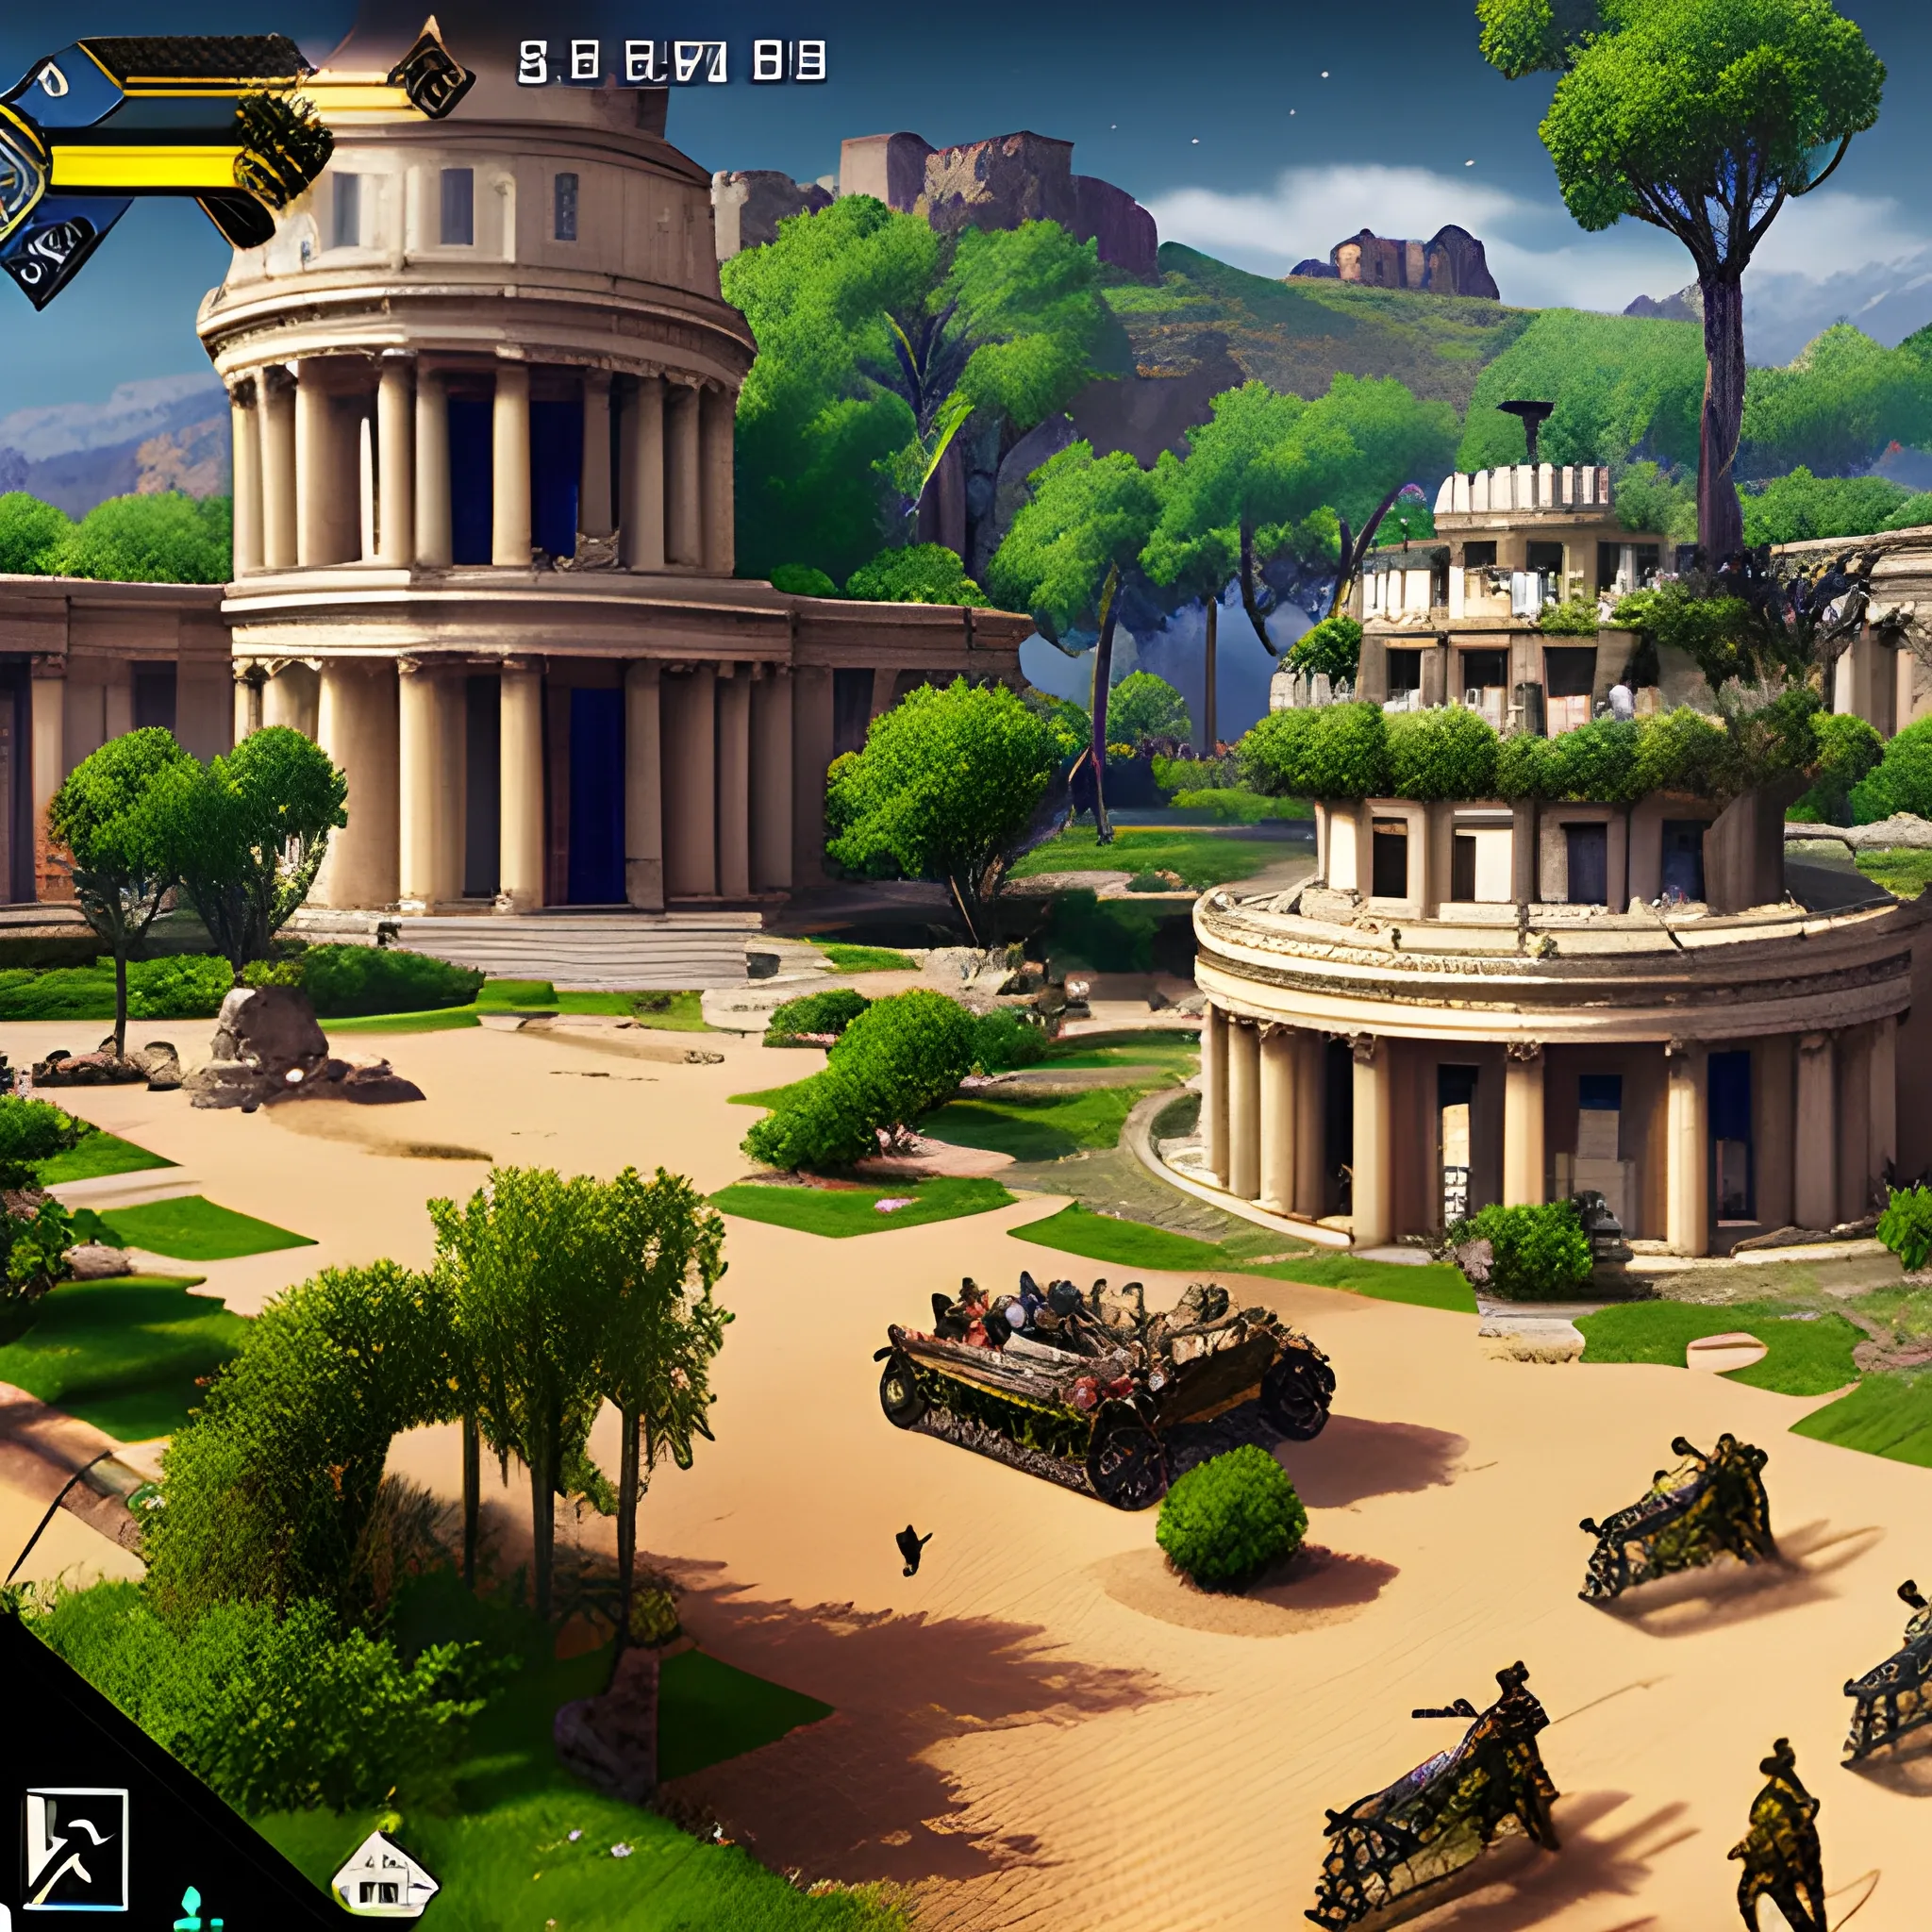 videogame screenshot with huge spangly sparkly triple-barrelled assault rifle with gunsight in foreground, with young mothers pushing buggies, in a municipal gardens, in the ancient world, very detailed